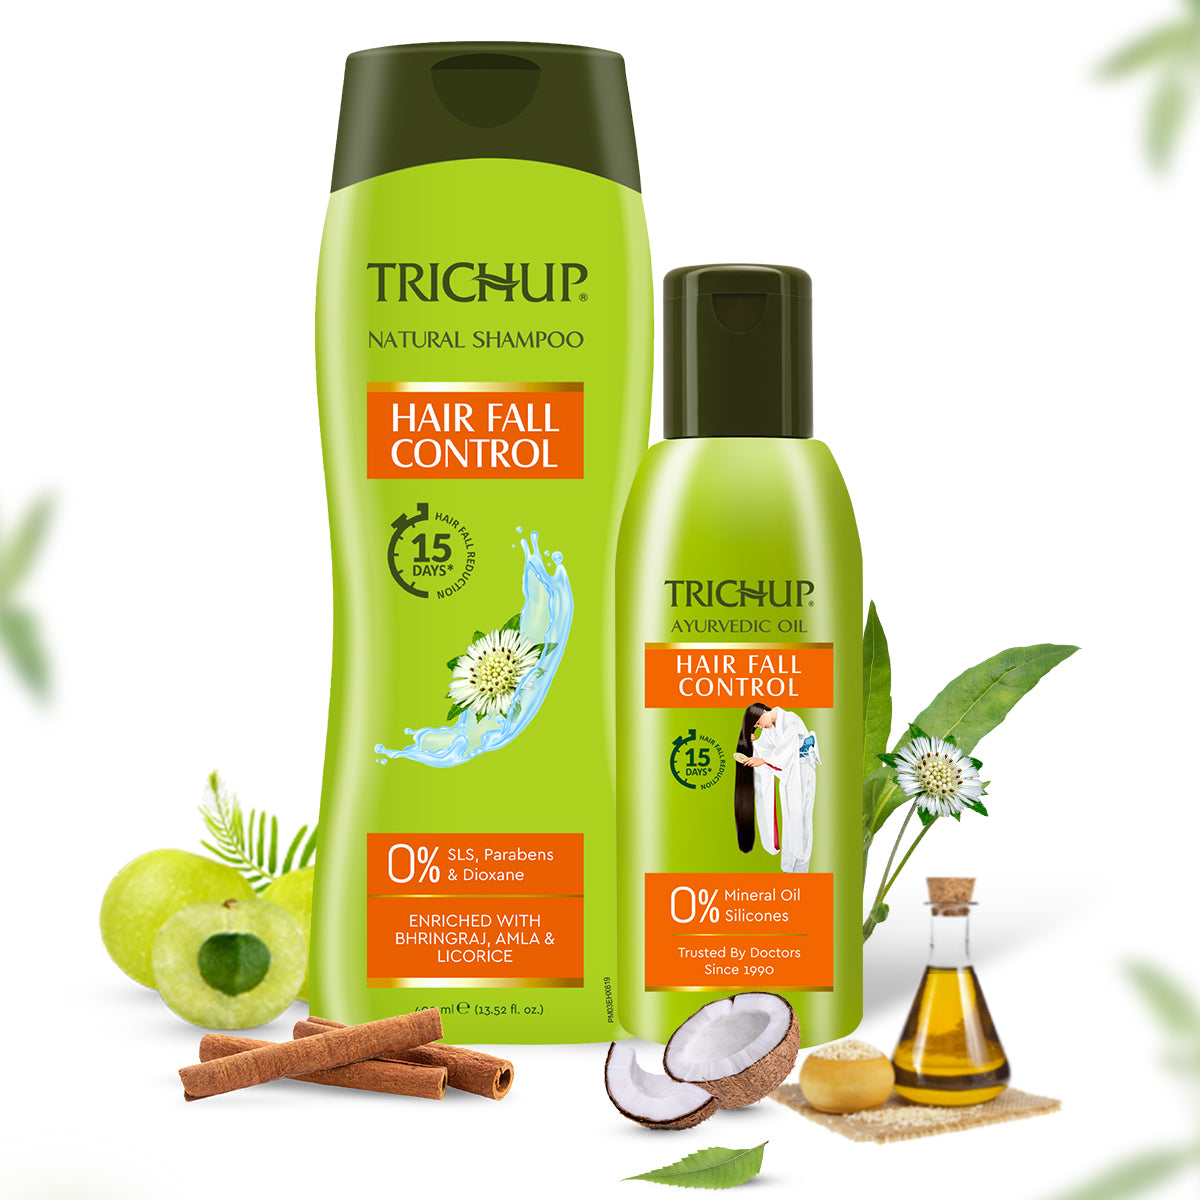 Trichup Hair Fall Control Oil(200ml) & Shampoo(400ml) - Enriched with Amla & Bhringraj - Helps to Reduce Hair Fall , Strengthens Your Hair Follicles & Keeps Hair Healthy